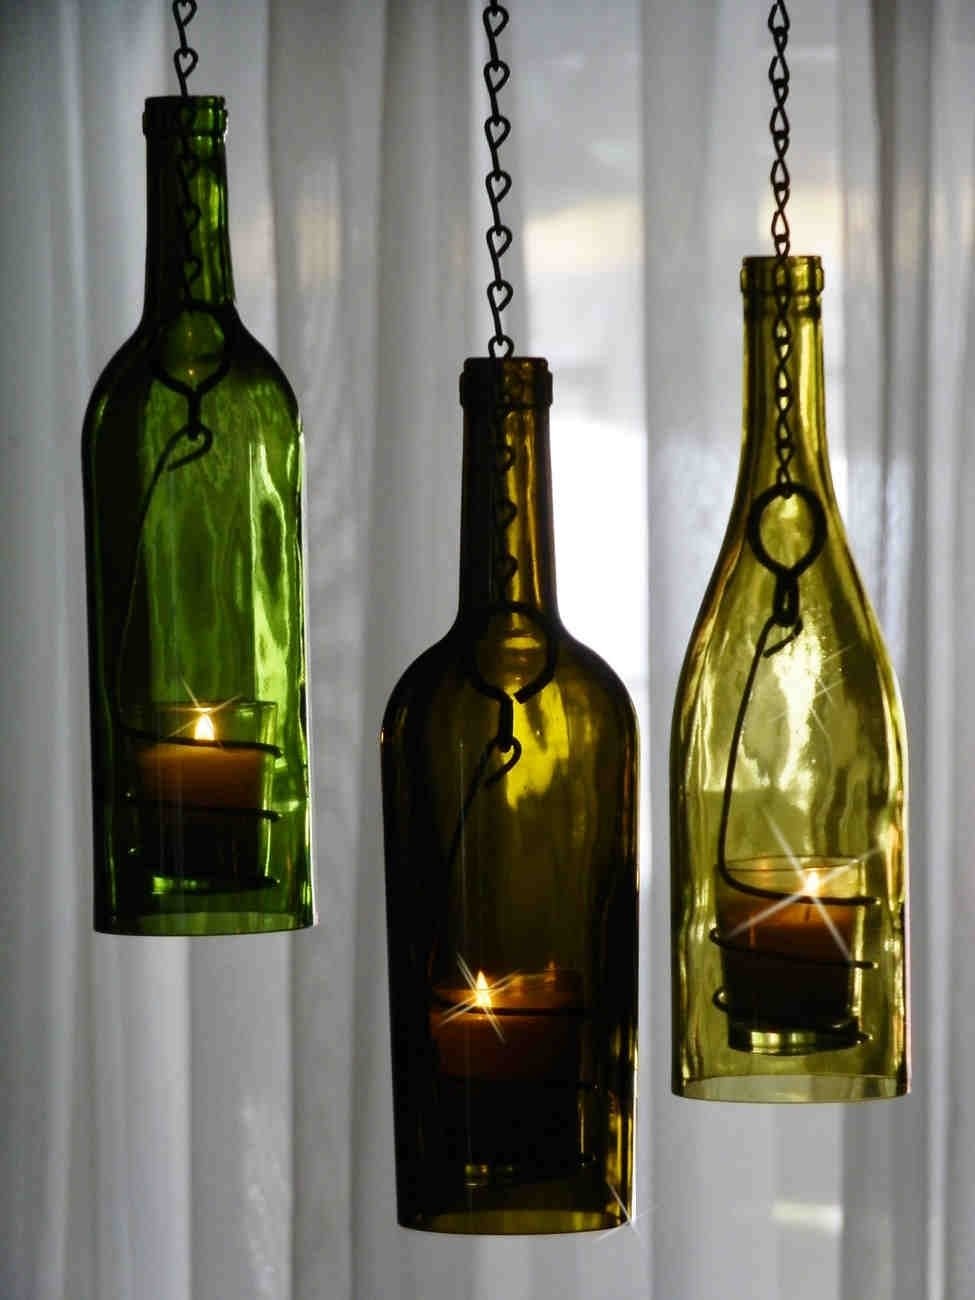 10 Stylish Ideas For Old Wine Bottles diy wine bottle candle holders pretty cool diy light 2022